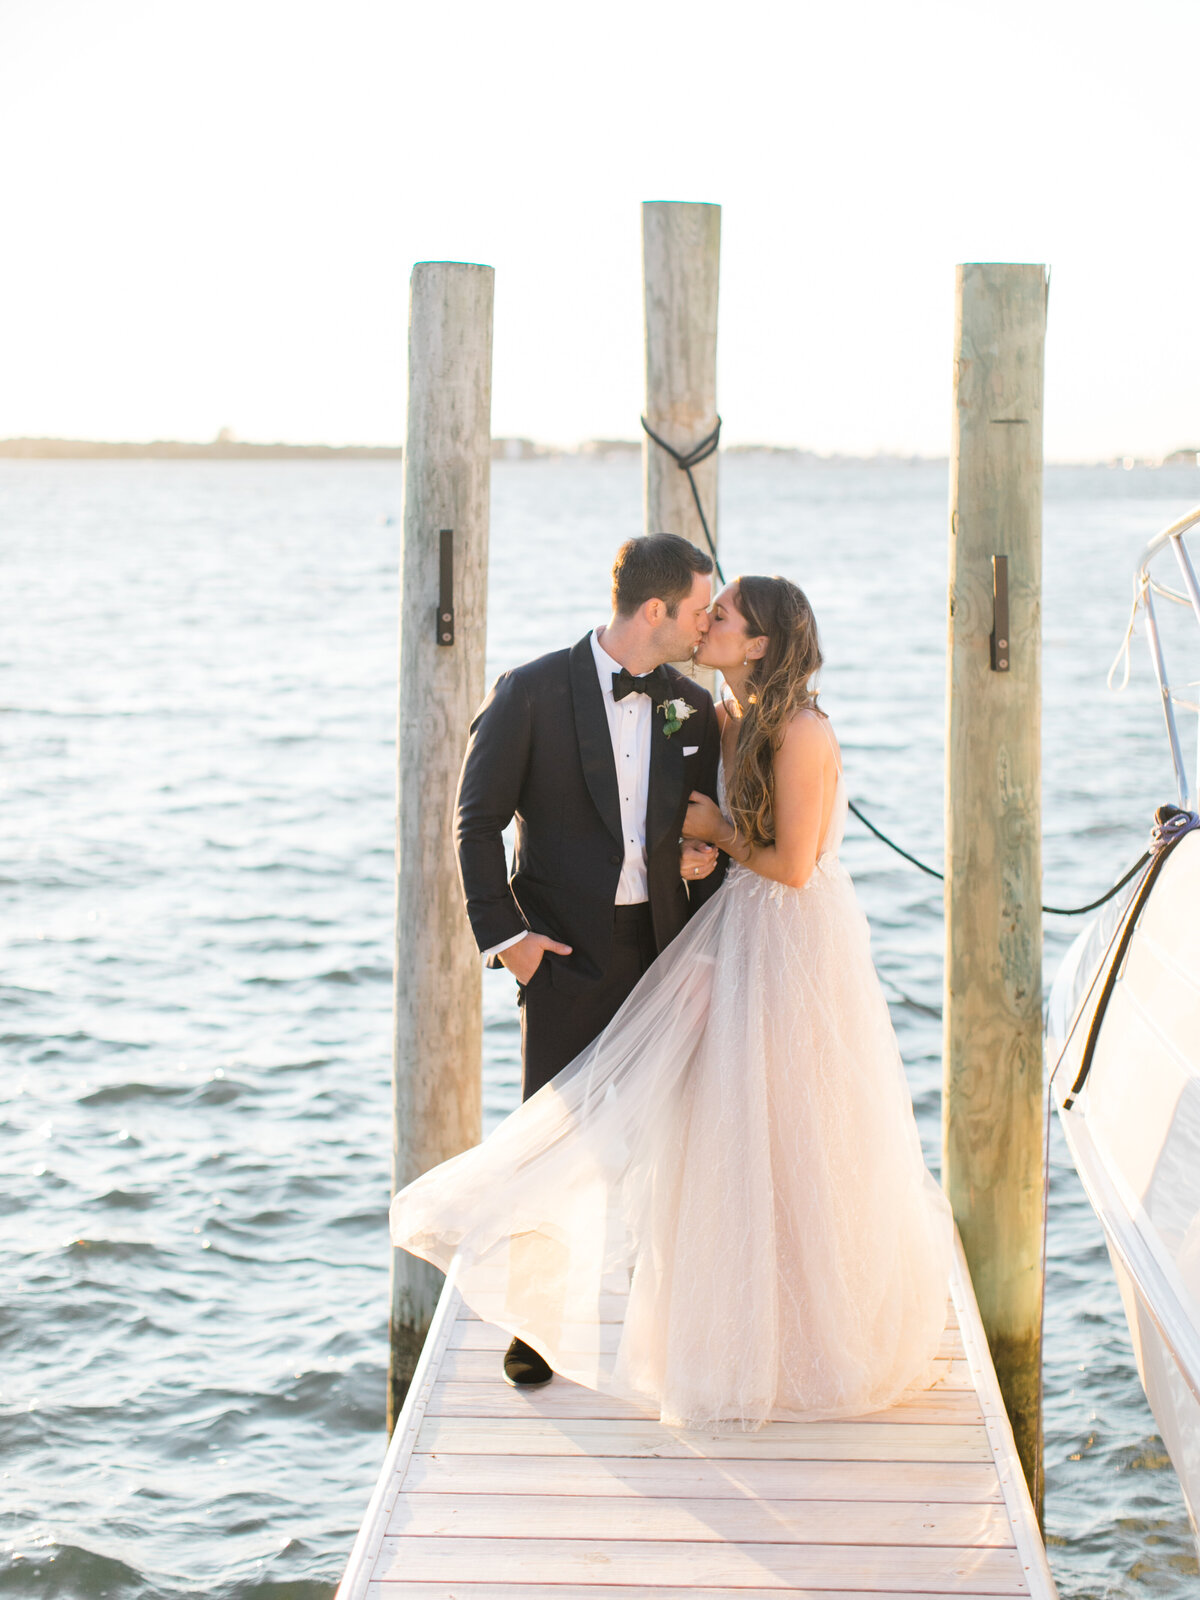 bride and groom staking an a dock on a lake kissing